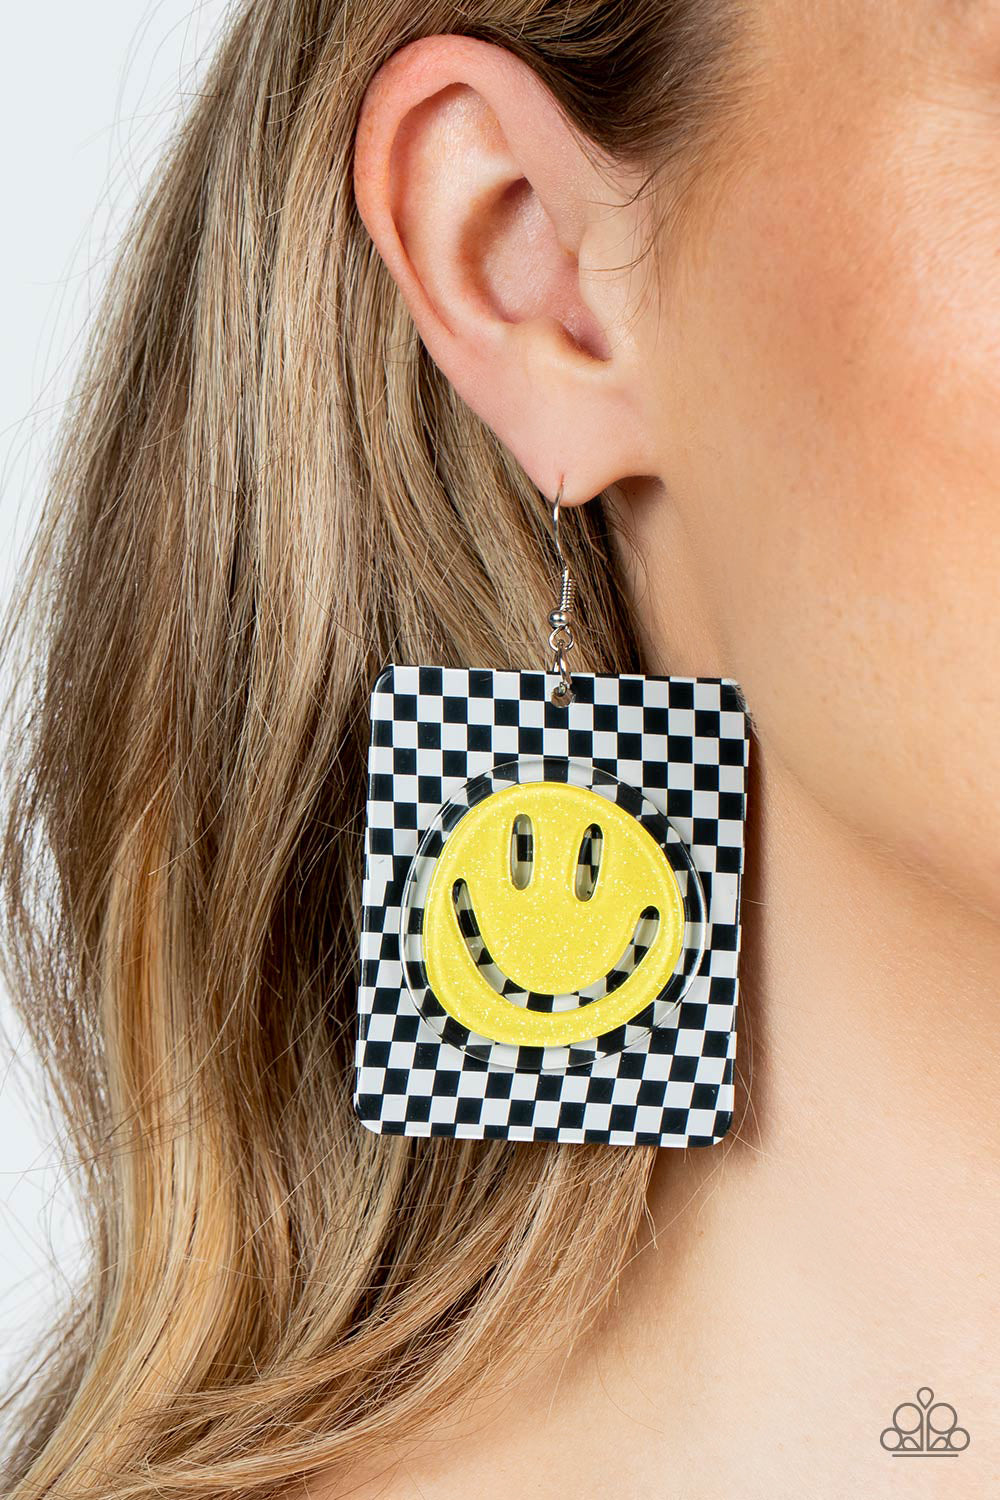 Set against a trendy, checkerboard backdrop, an oversized, sparkly, yellow smiley face stands out for a cheerfully captivating statement piece near the ear. Earring attaches to a standard fishhook fitting.